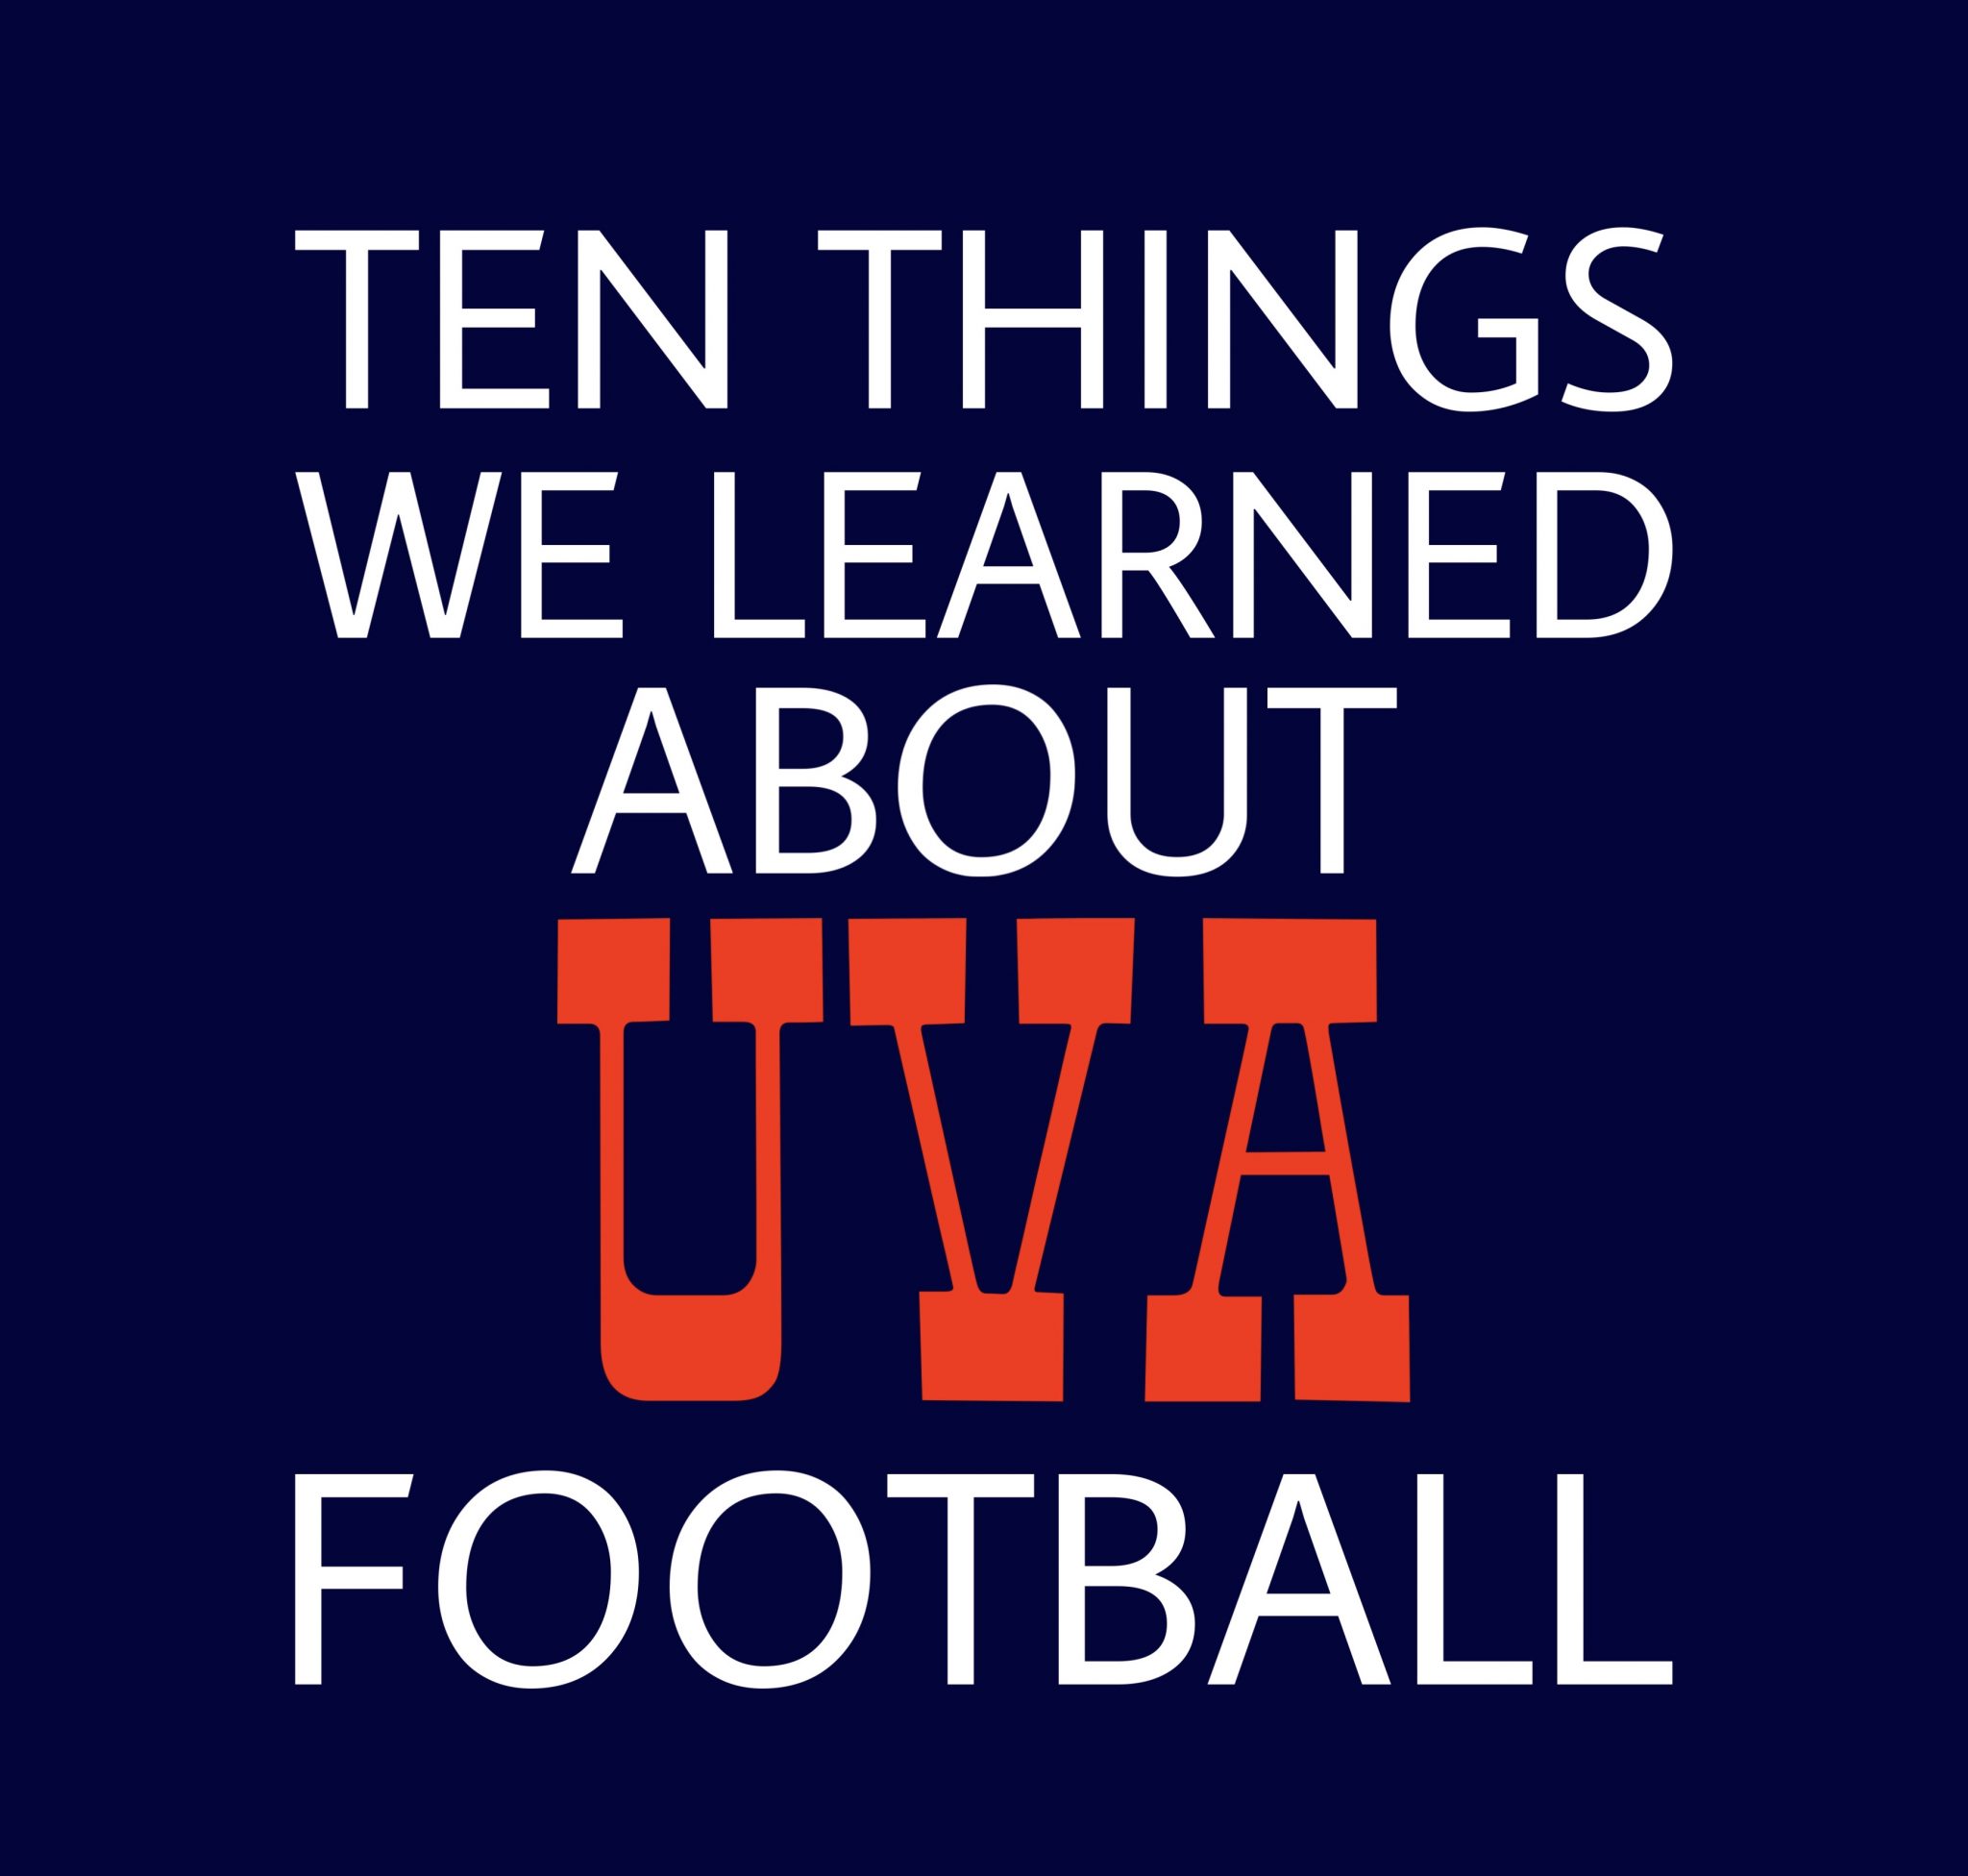 Ten things we learned about UVA football following the Duke game